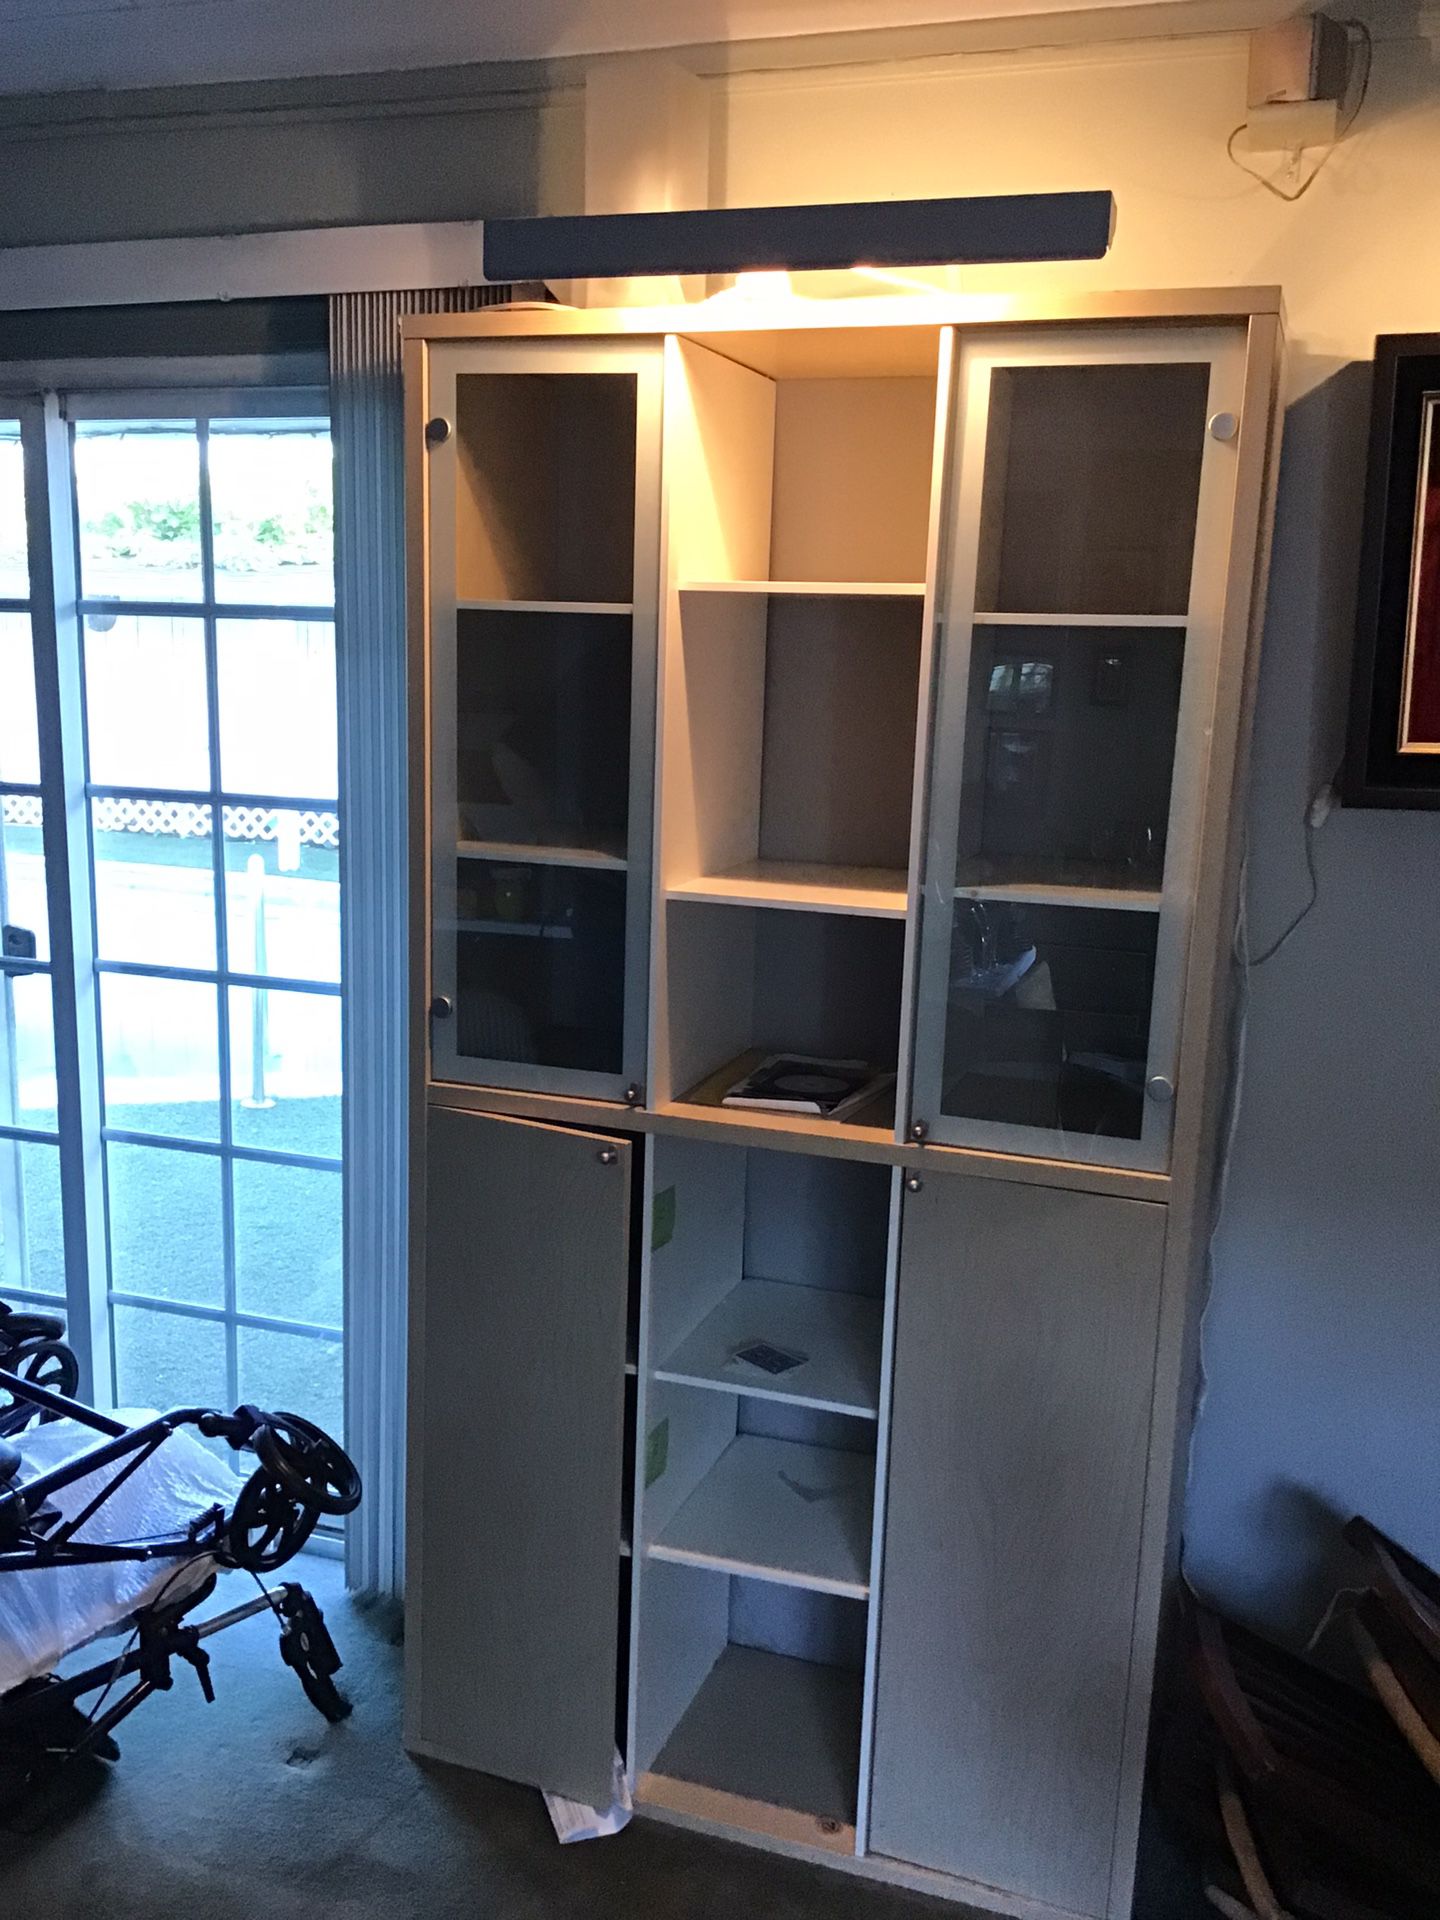 MEDIA/BOOK STORAGE CASE, w/GLASS-DOOR, DISPLAY SHELVES + ATTACHED DISPLAY LIGHT - MAKE AN OFFER